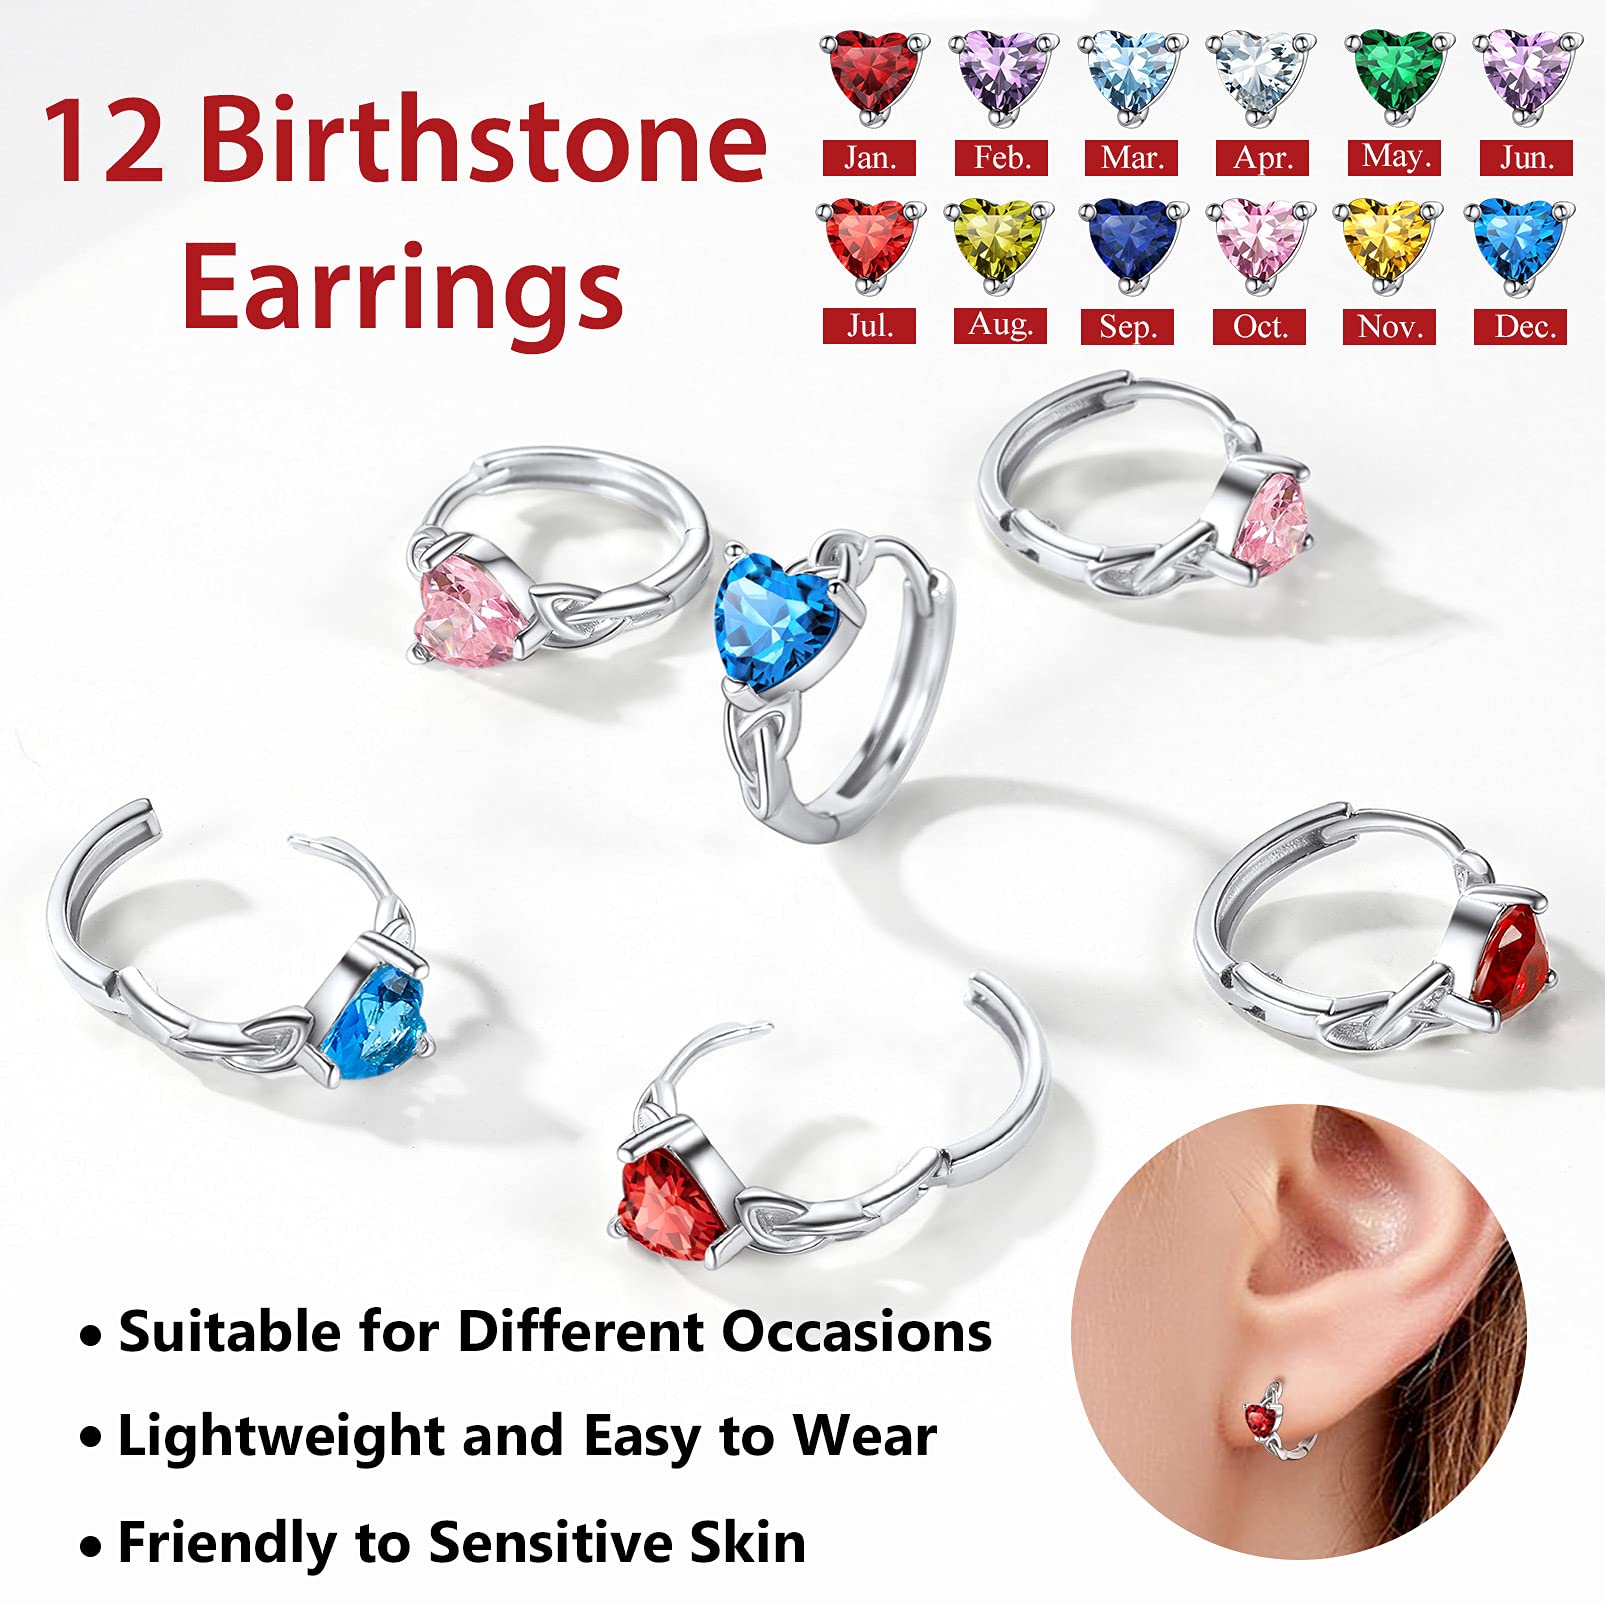 Silvora Celtic Knot Sterling Silver Birthstone Hoop Earrings with Shiny Cubic Zirconia for Women Girls Birthday Jewelry